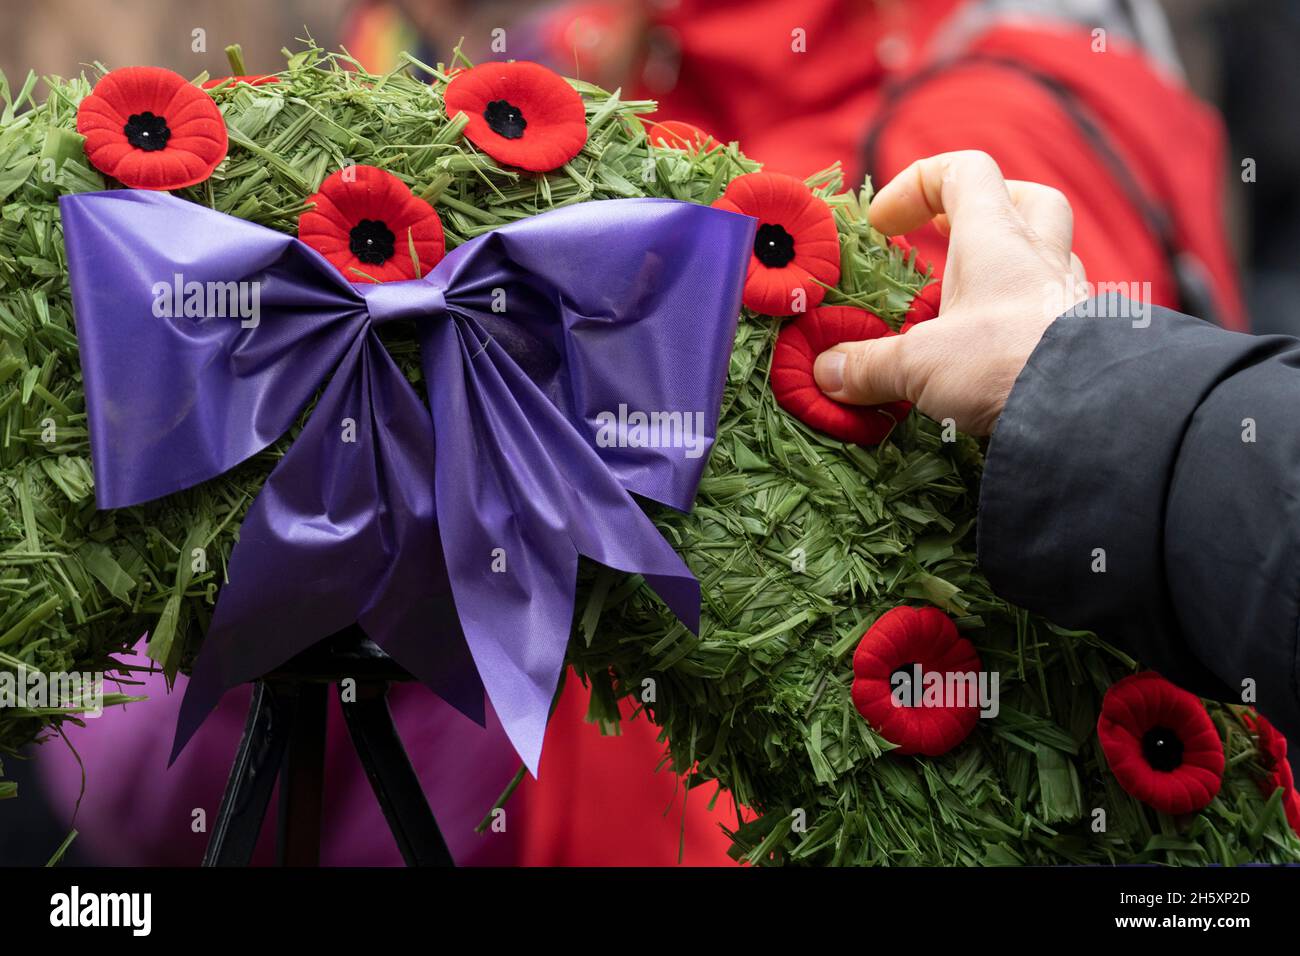 Hand Placing Poppy on Wreath, Remembrance Day, Toronto, Canada, Stock Photo